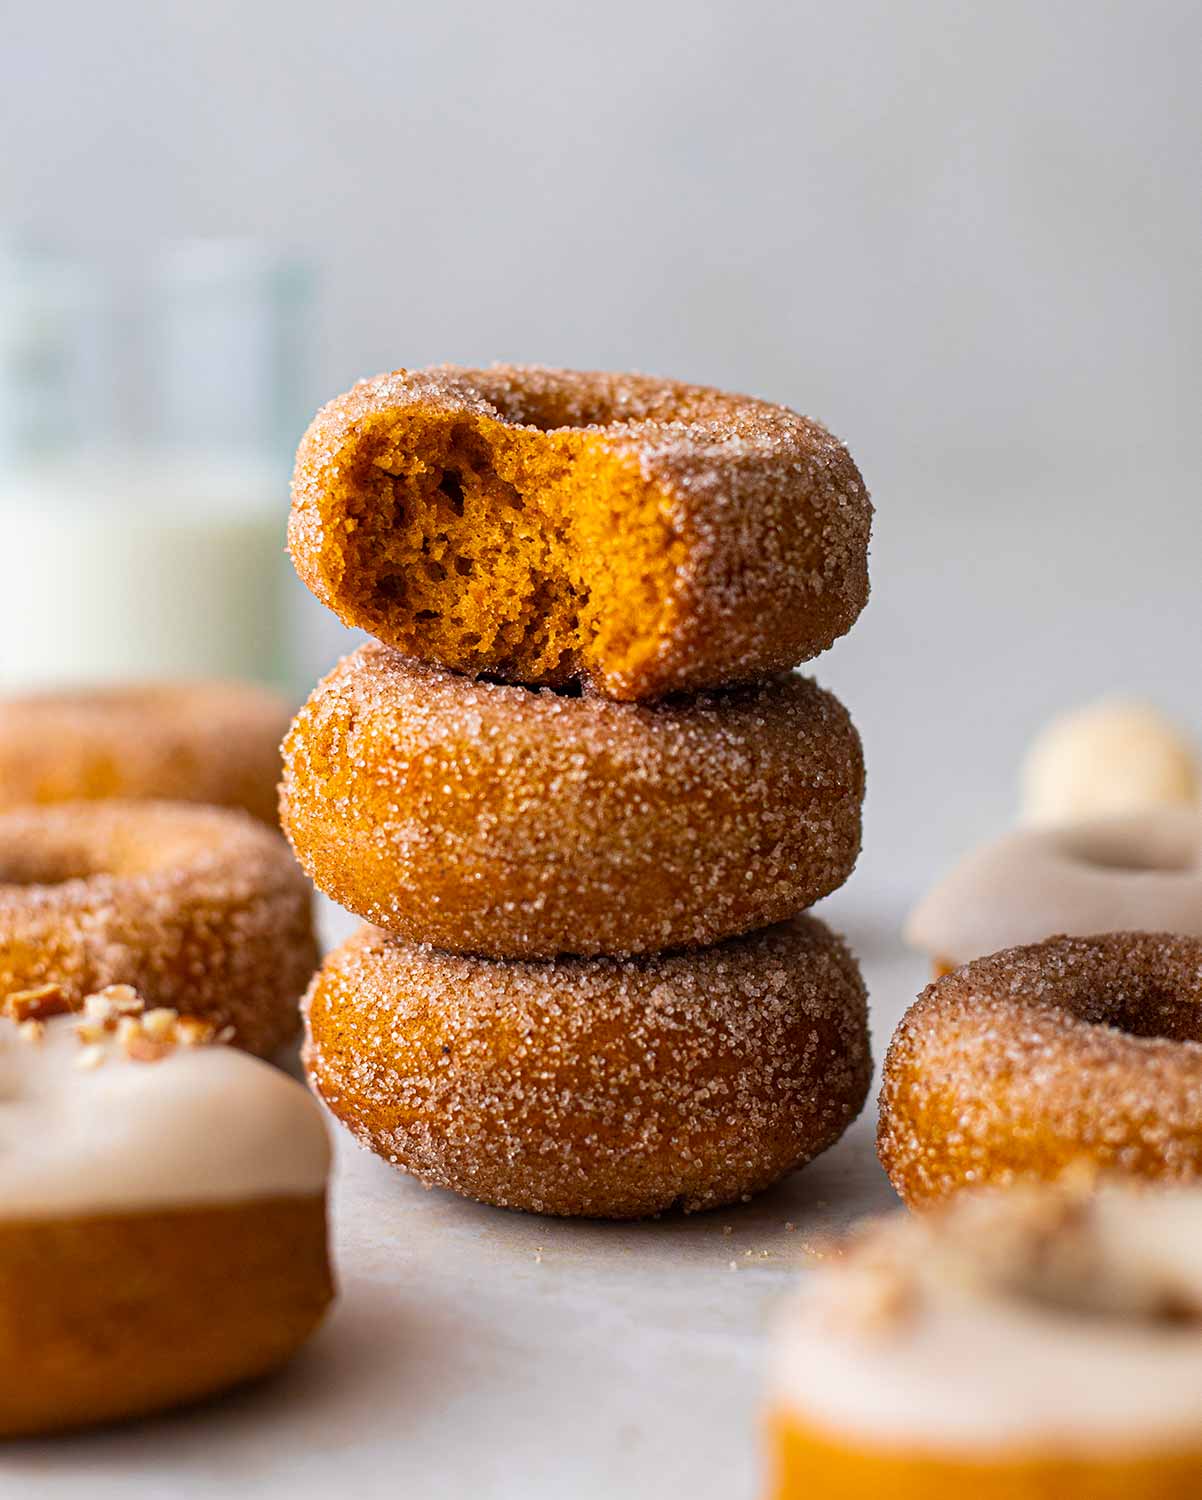 Stack of sugar coated and thick donuts showing golden orange and fluffy interior.